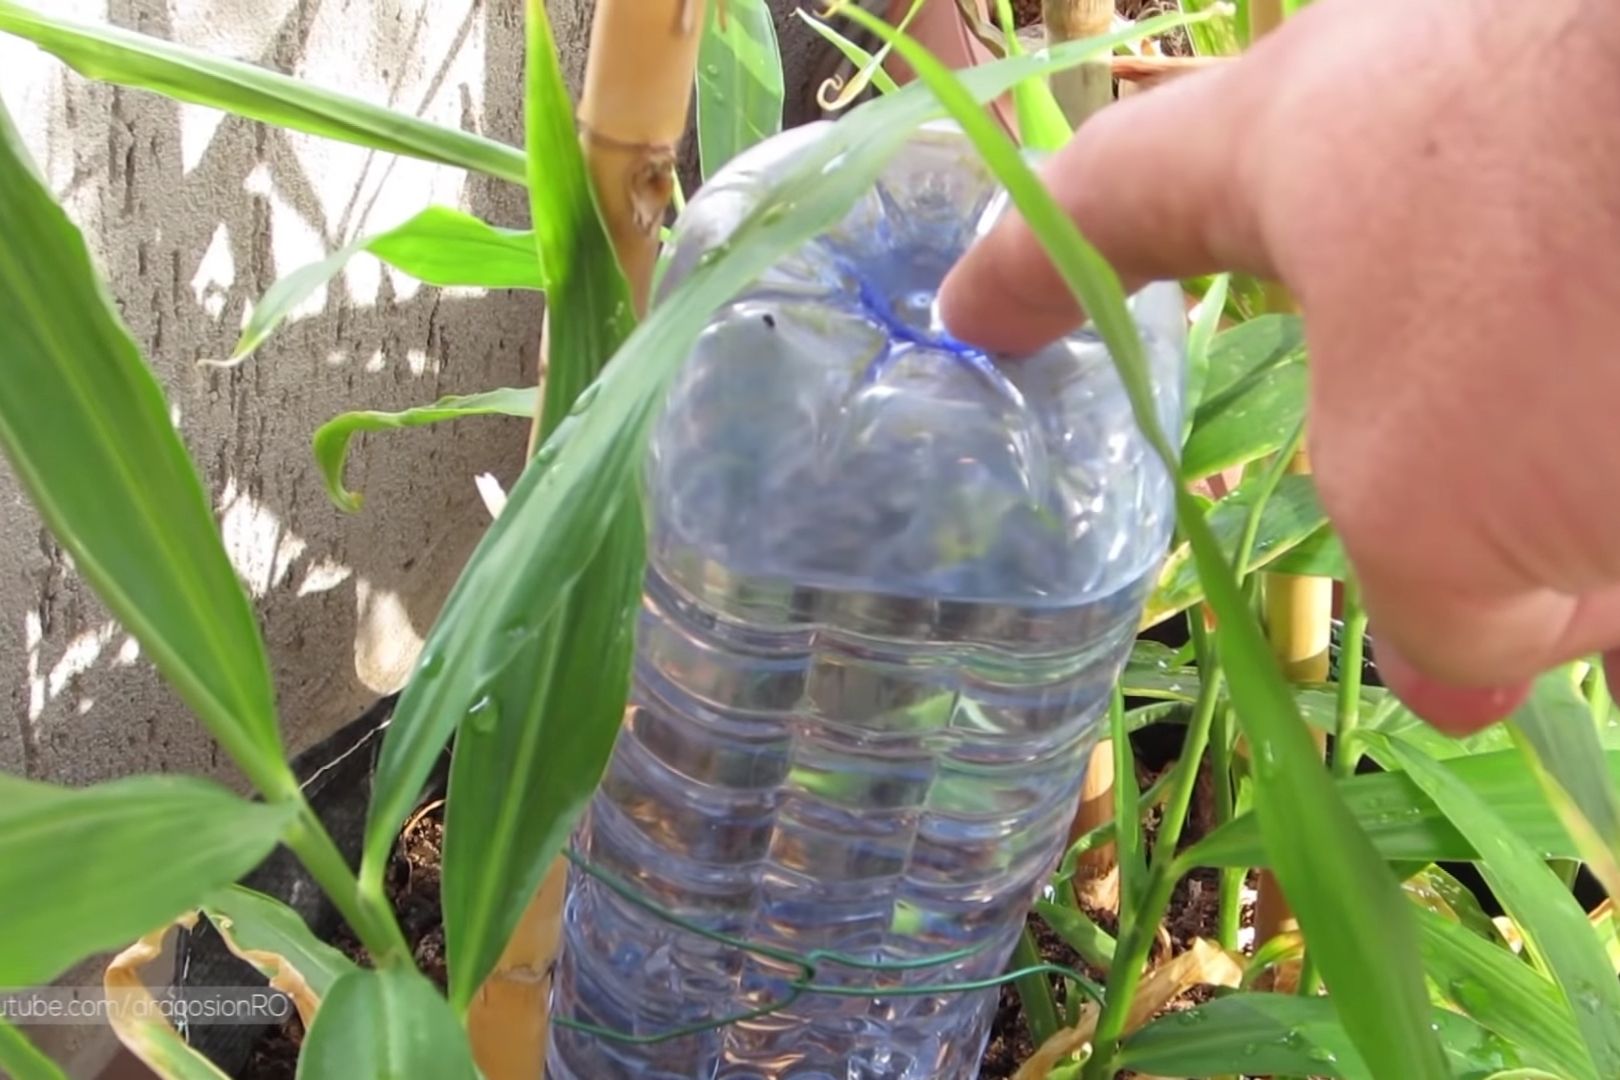 Water bottle releases water slowly to last for 1 week